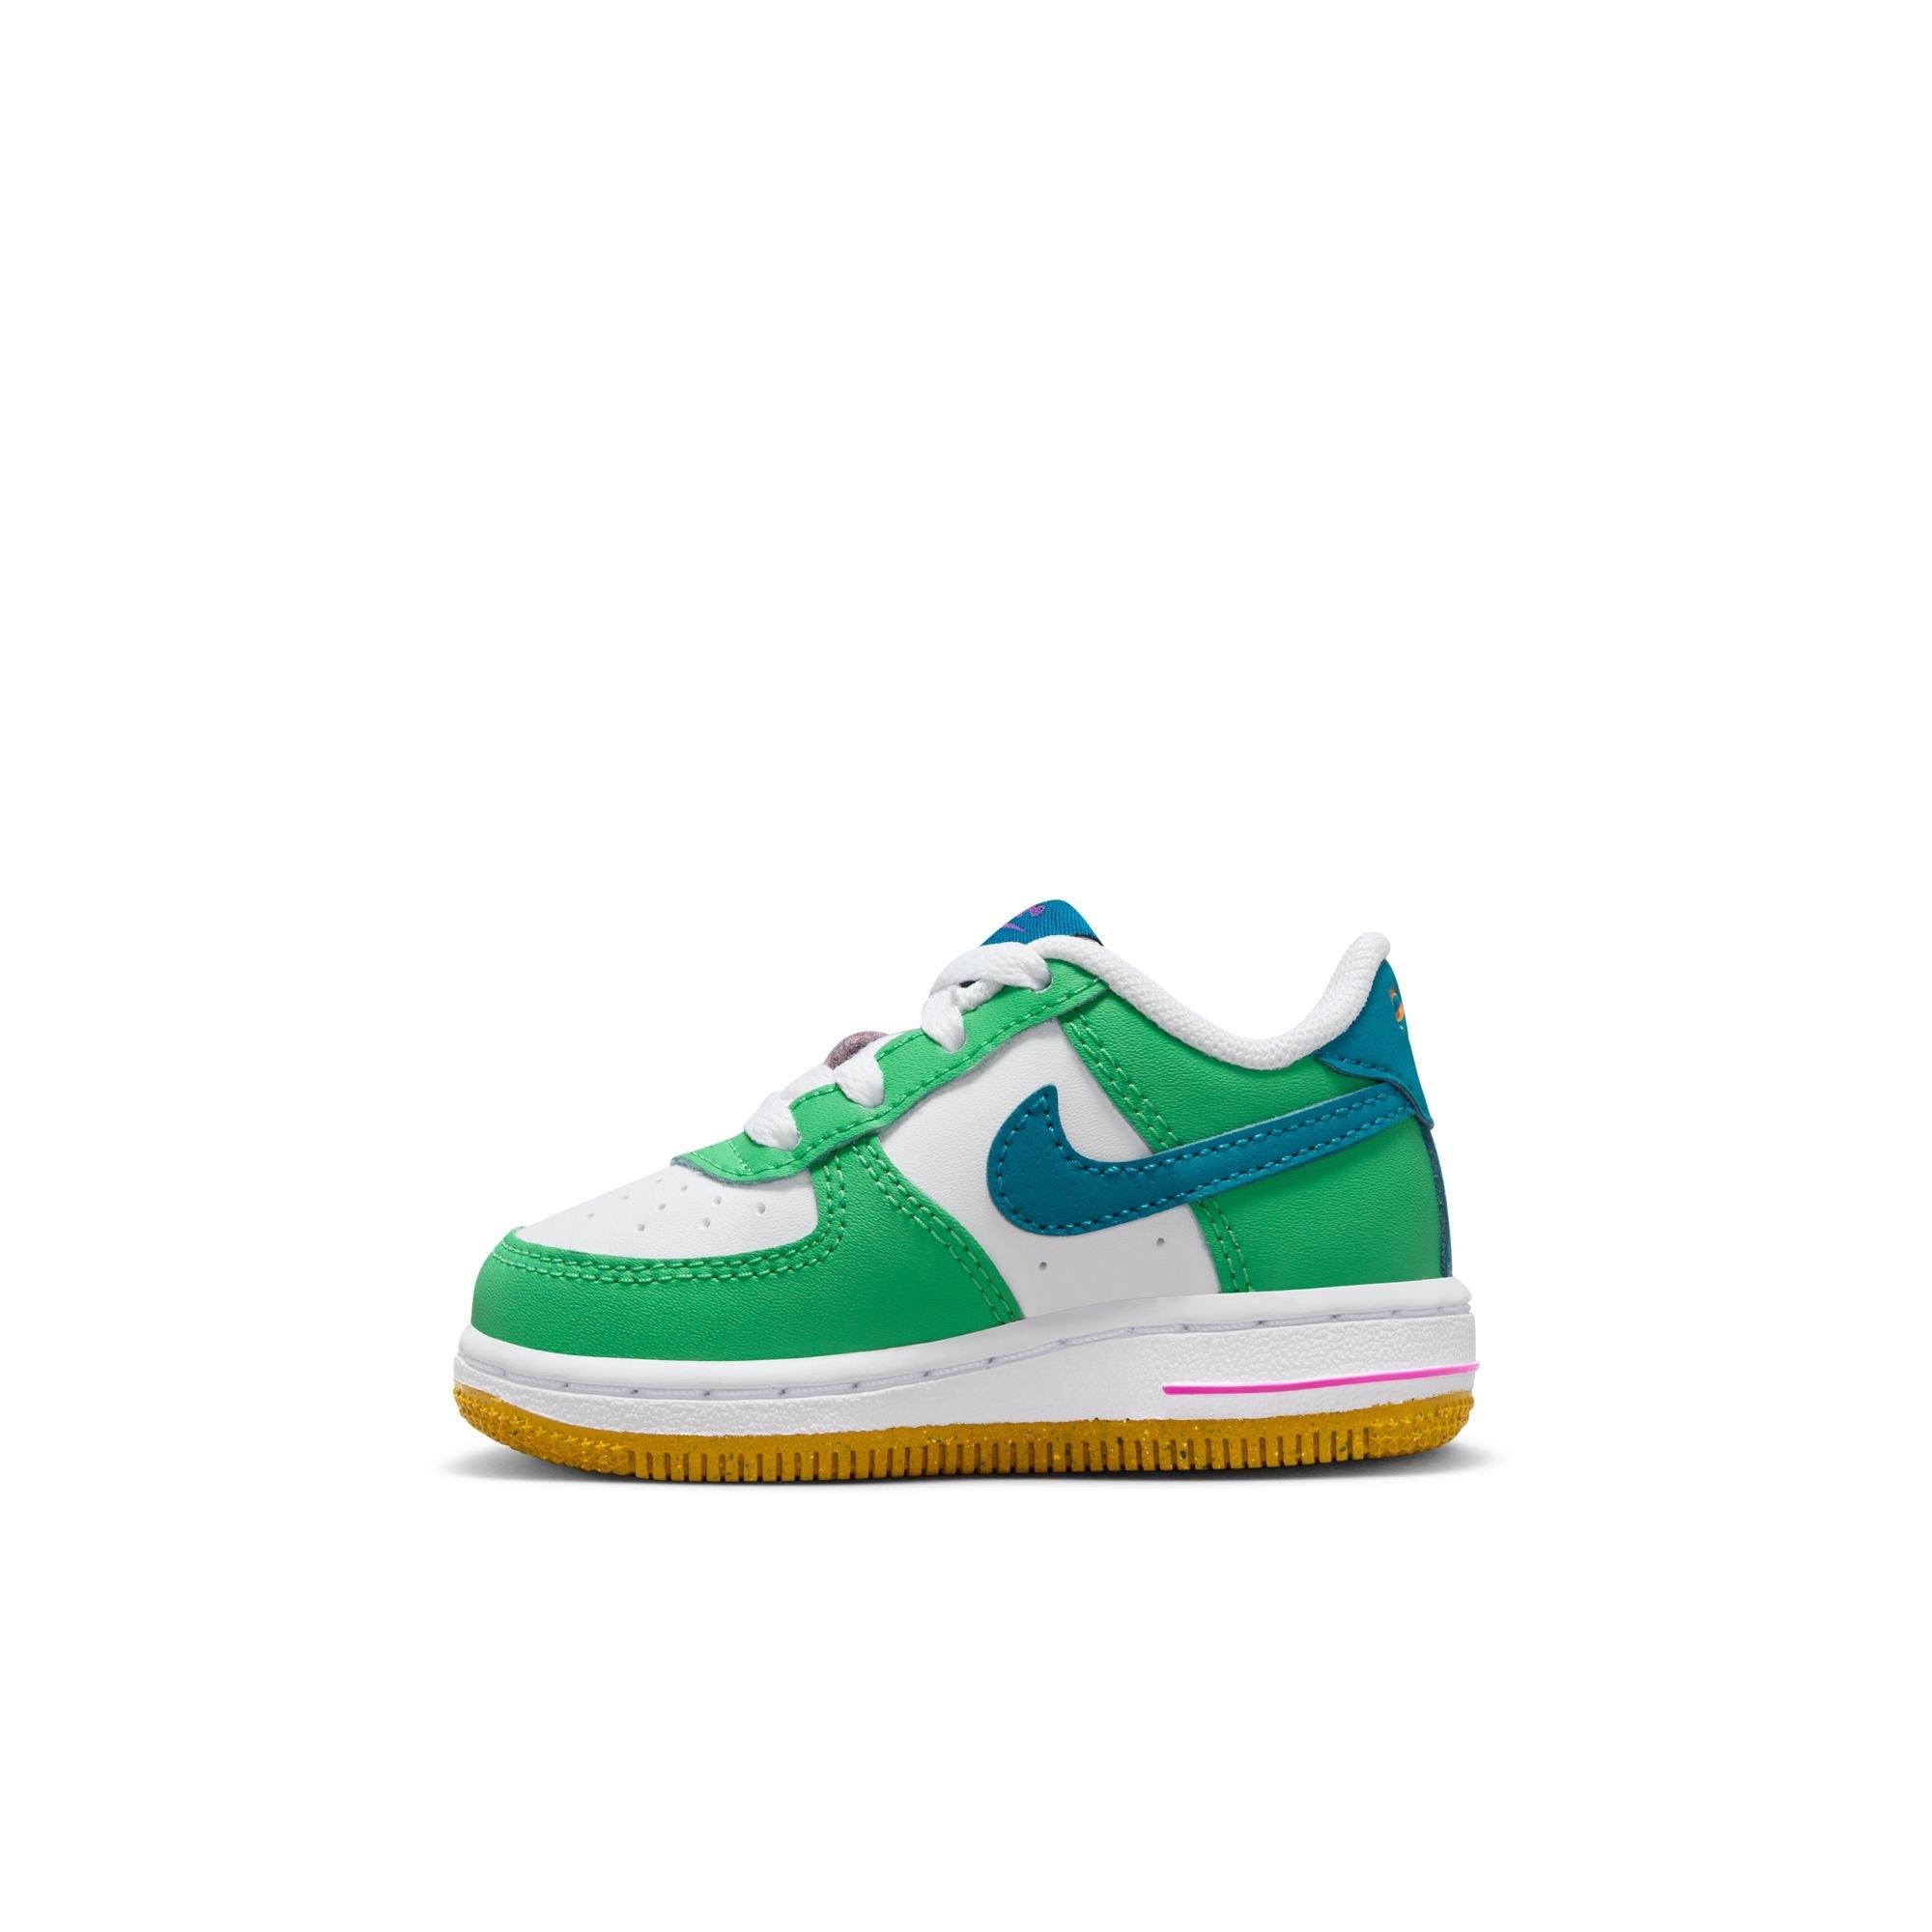 Nike Air Force 1 LV8 3 GS AF1 Sail Stadium Green Kids Youth Casual